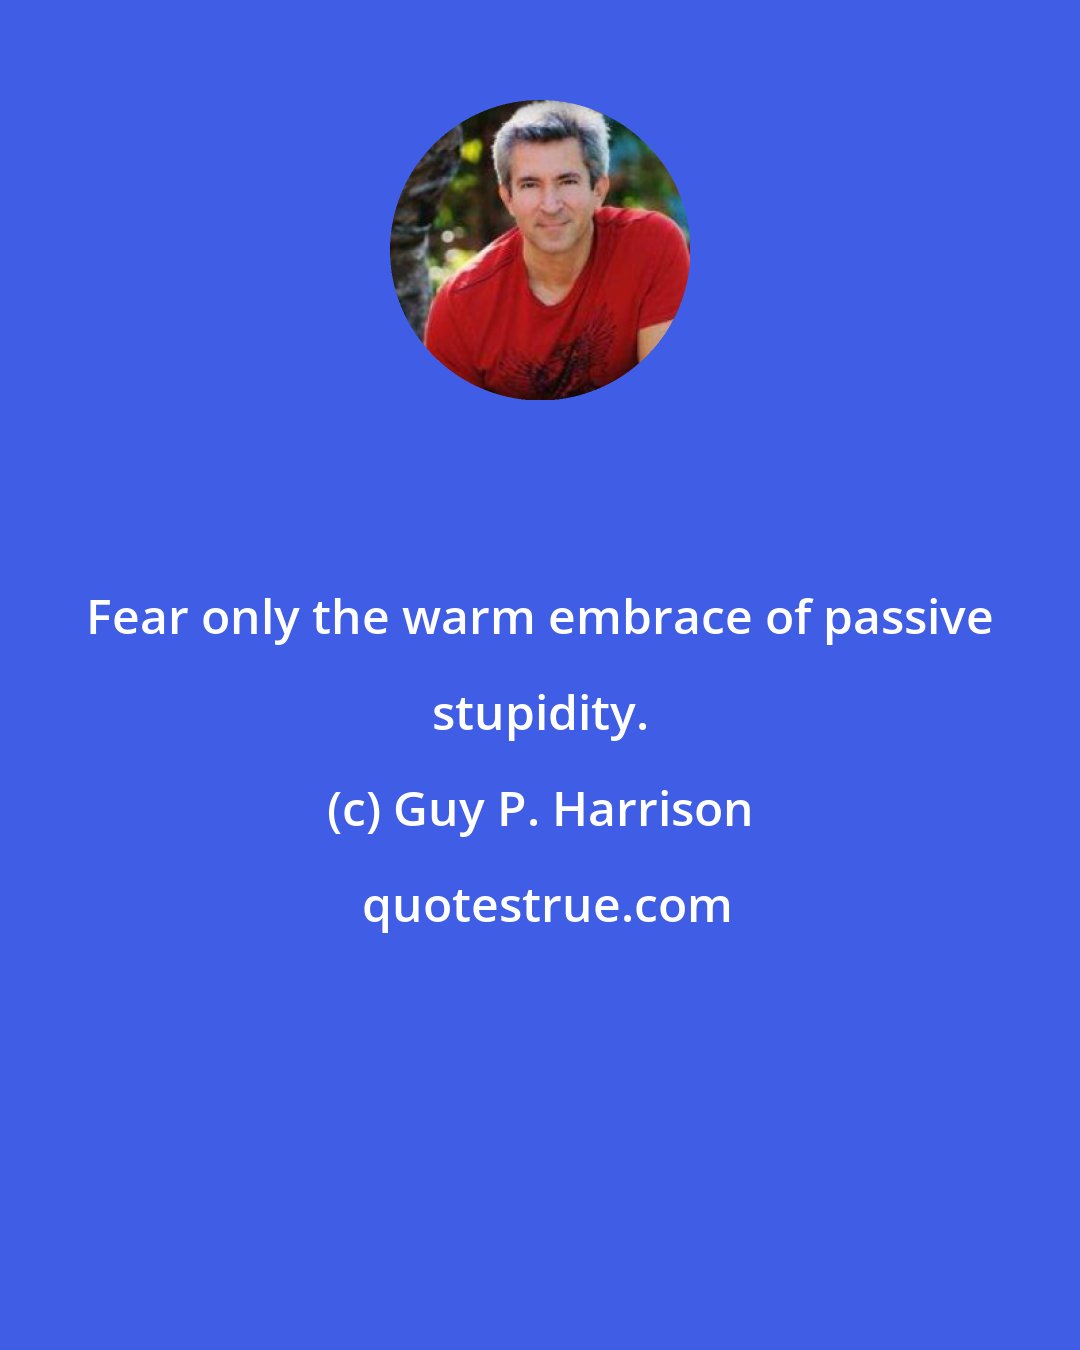 Guy P. Harrison: Fear only the warm embrace of passive stupidity.